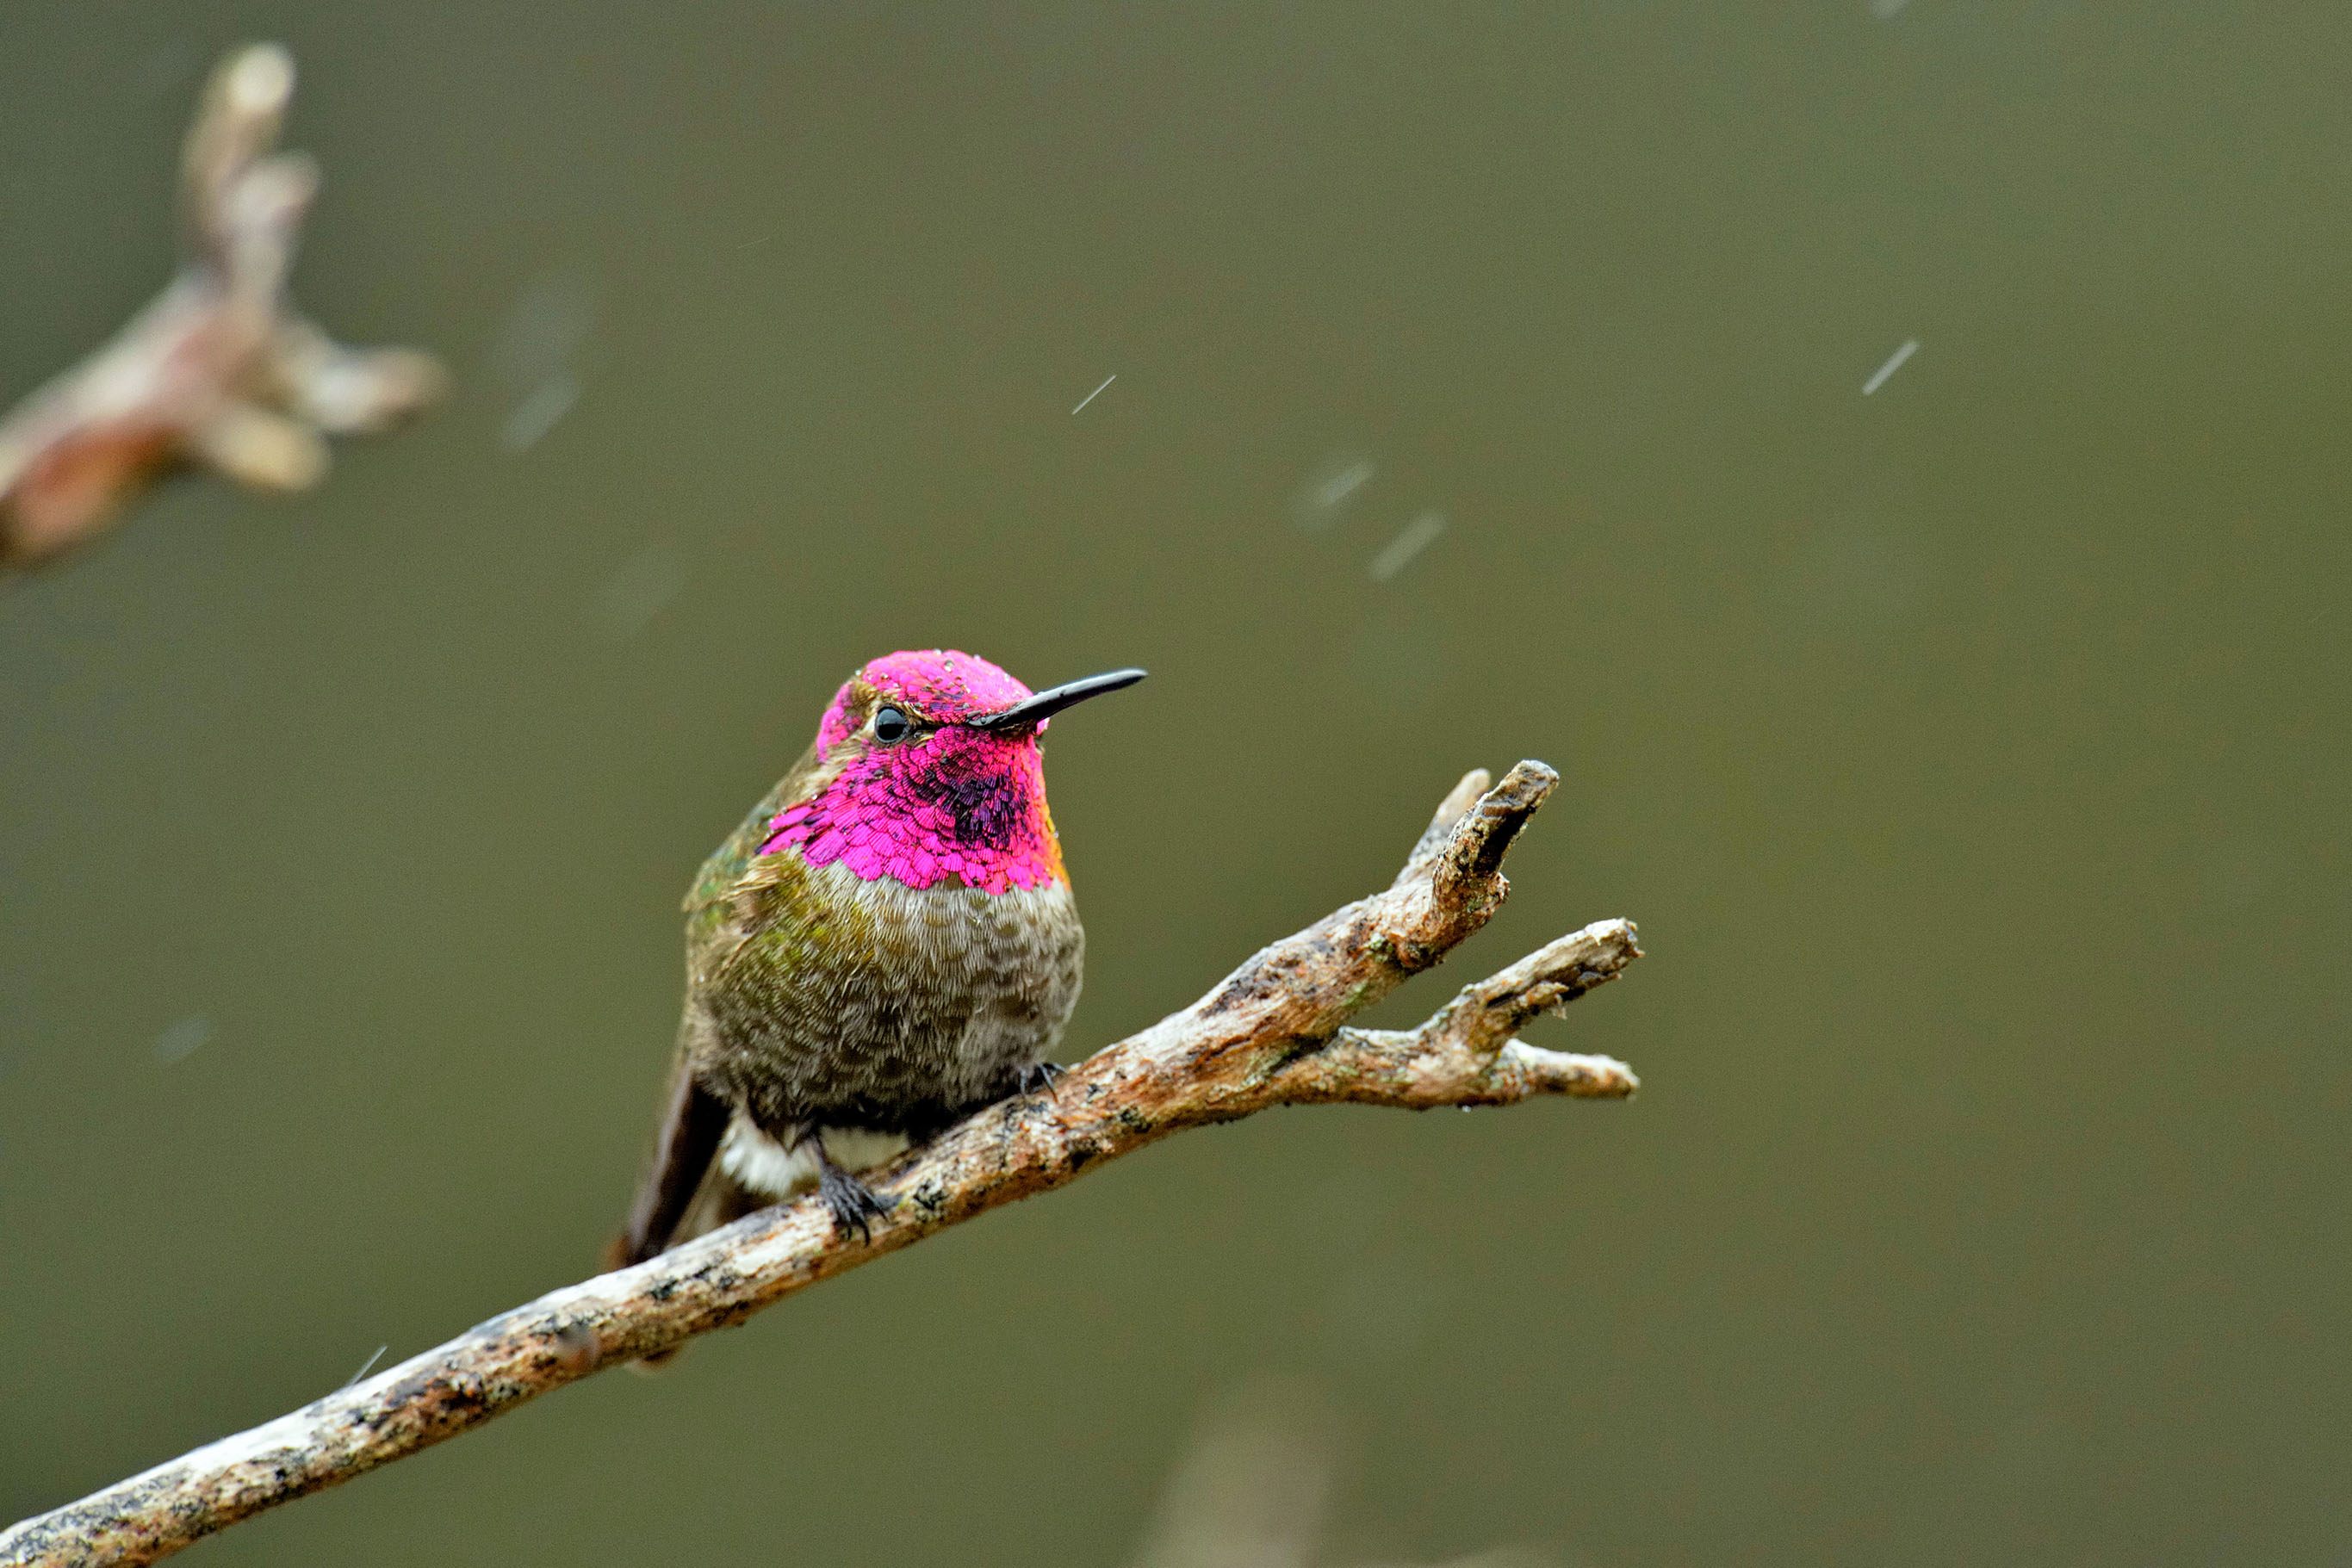 How the World's Smallest Birds Survive the Winter